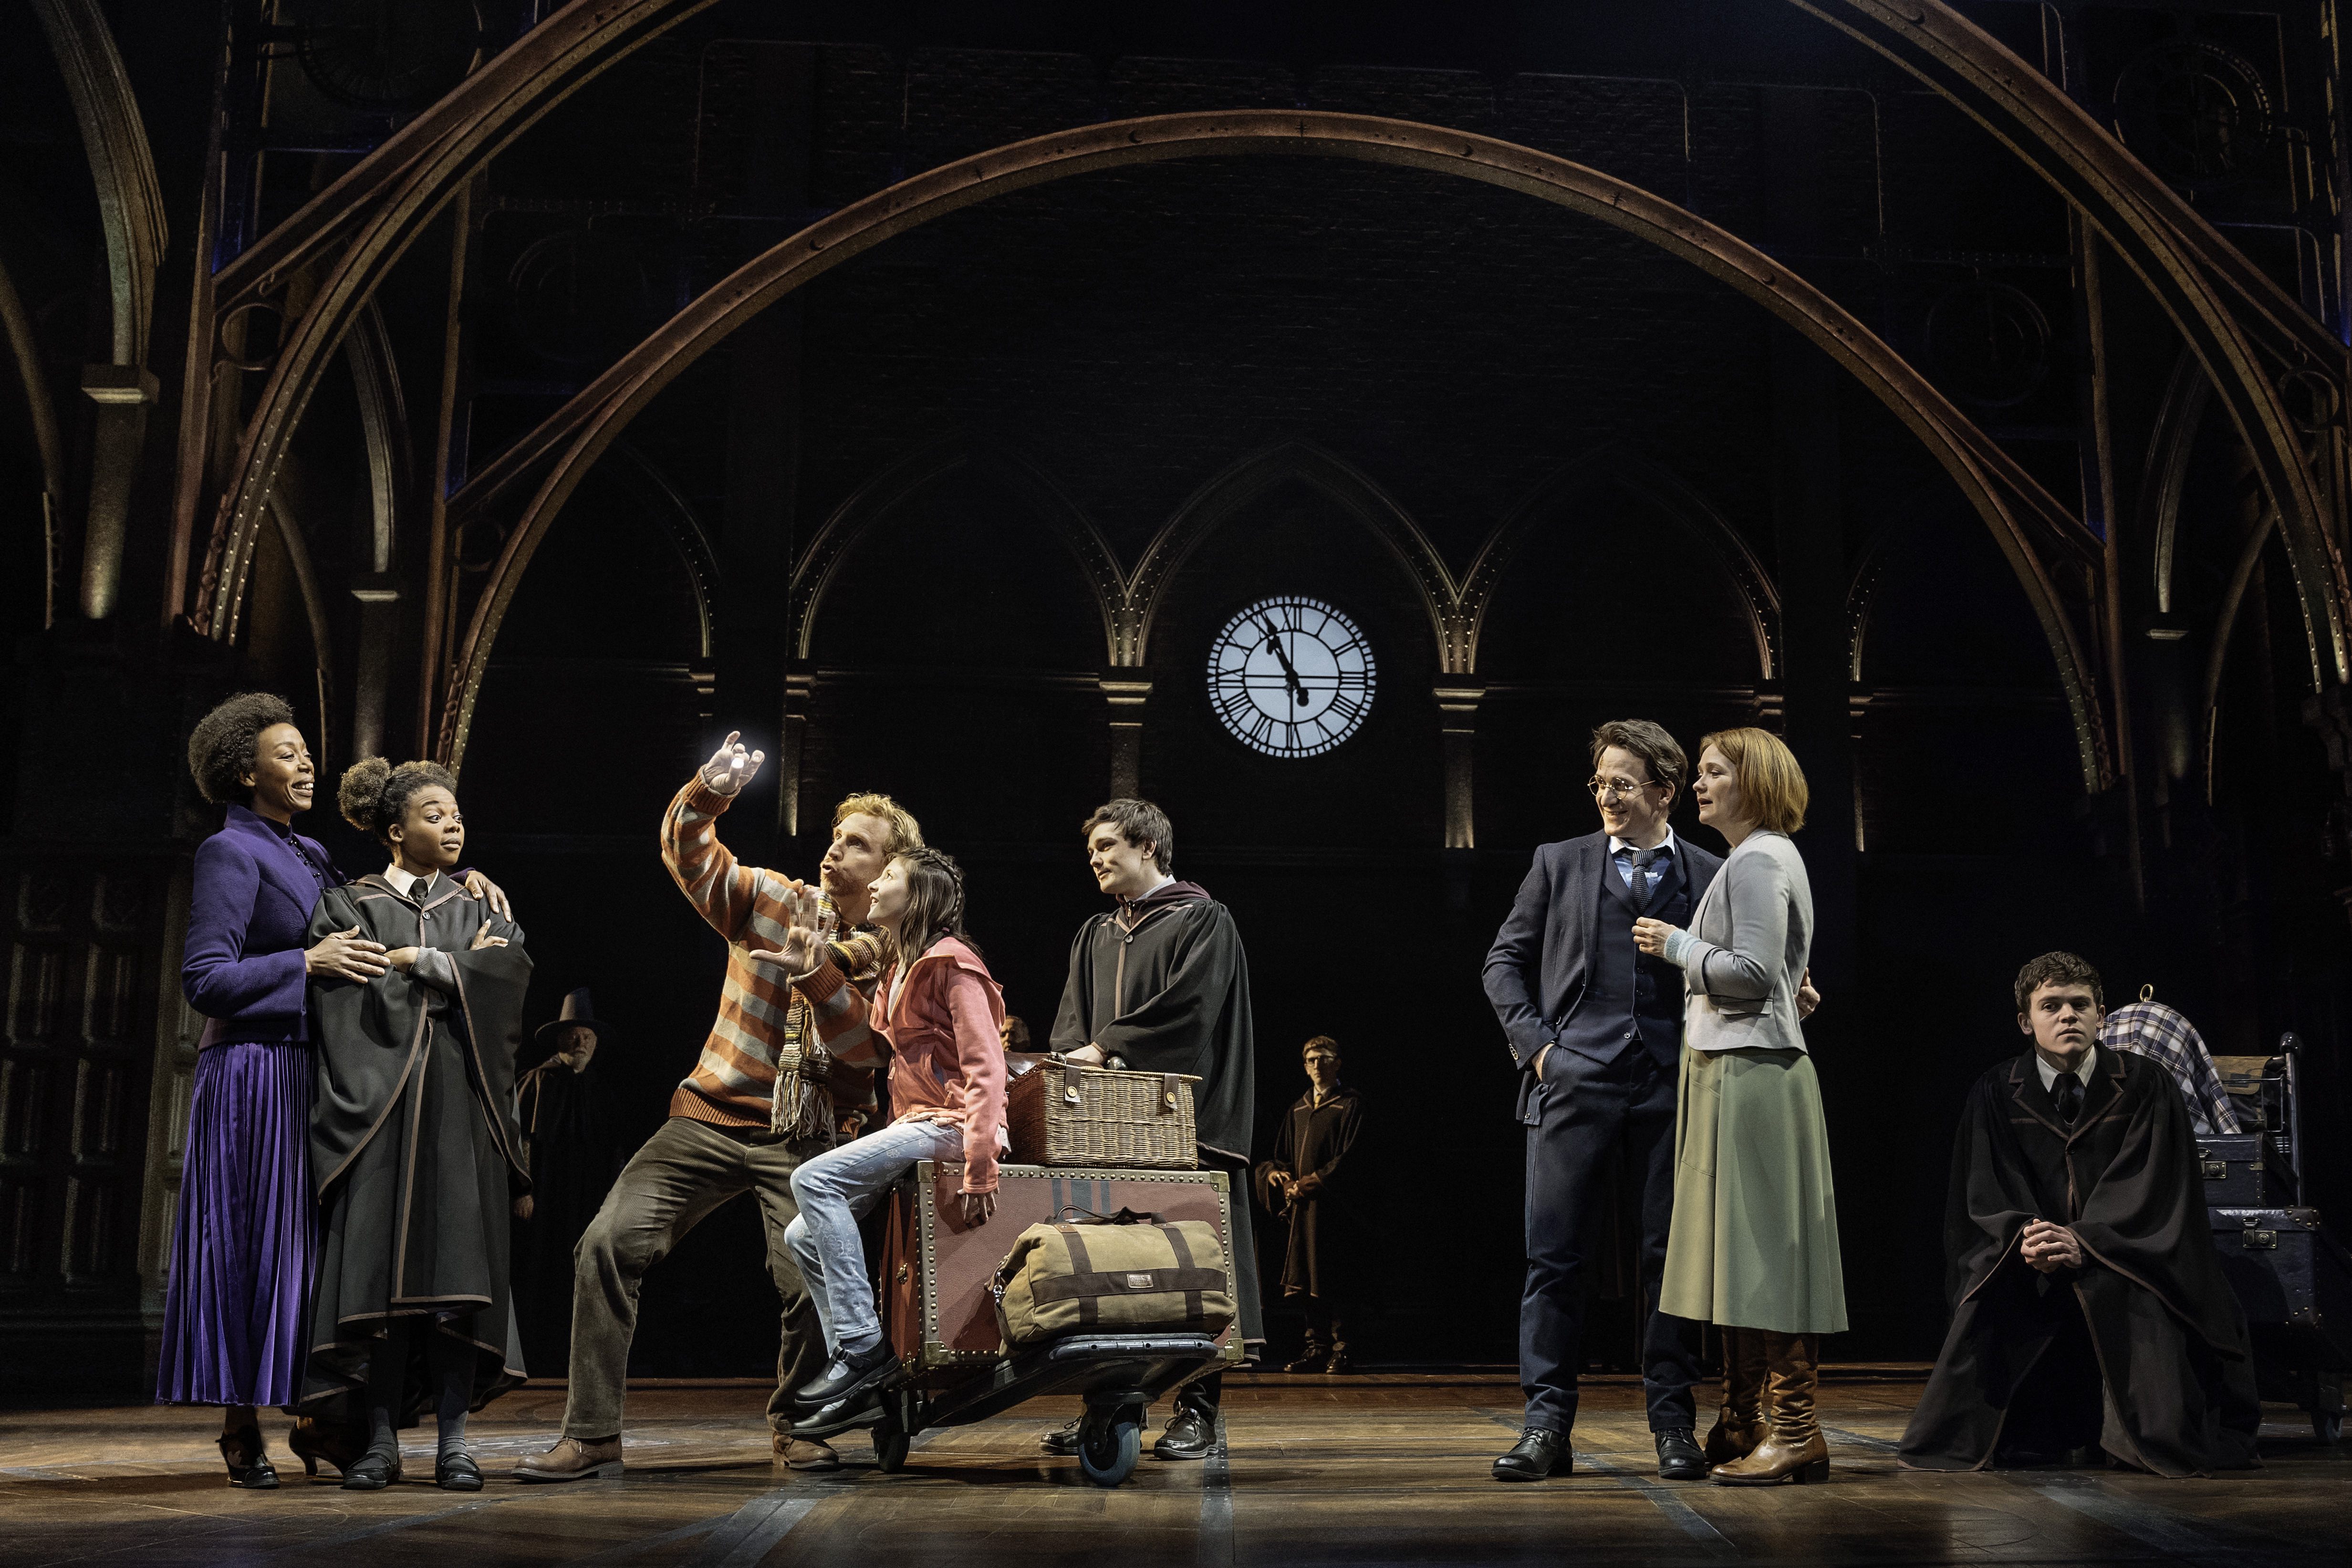 Harry Potter and the Cursed Child opens on Broadway - J.K. Rowling